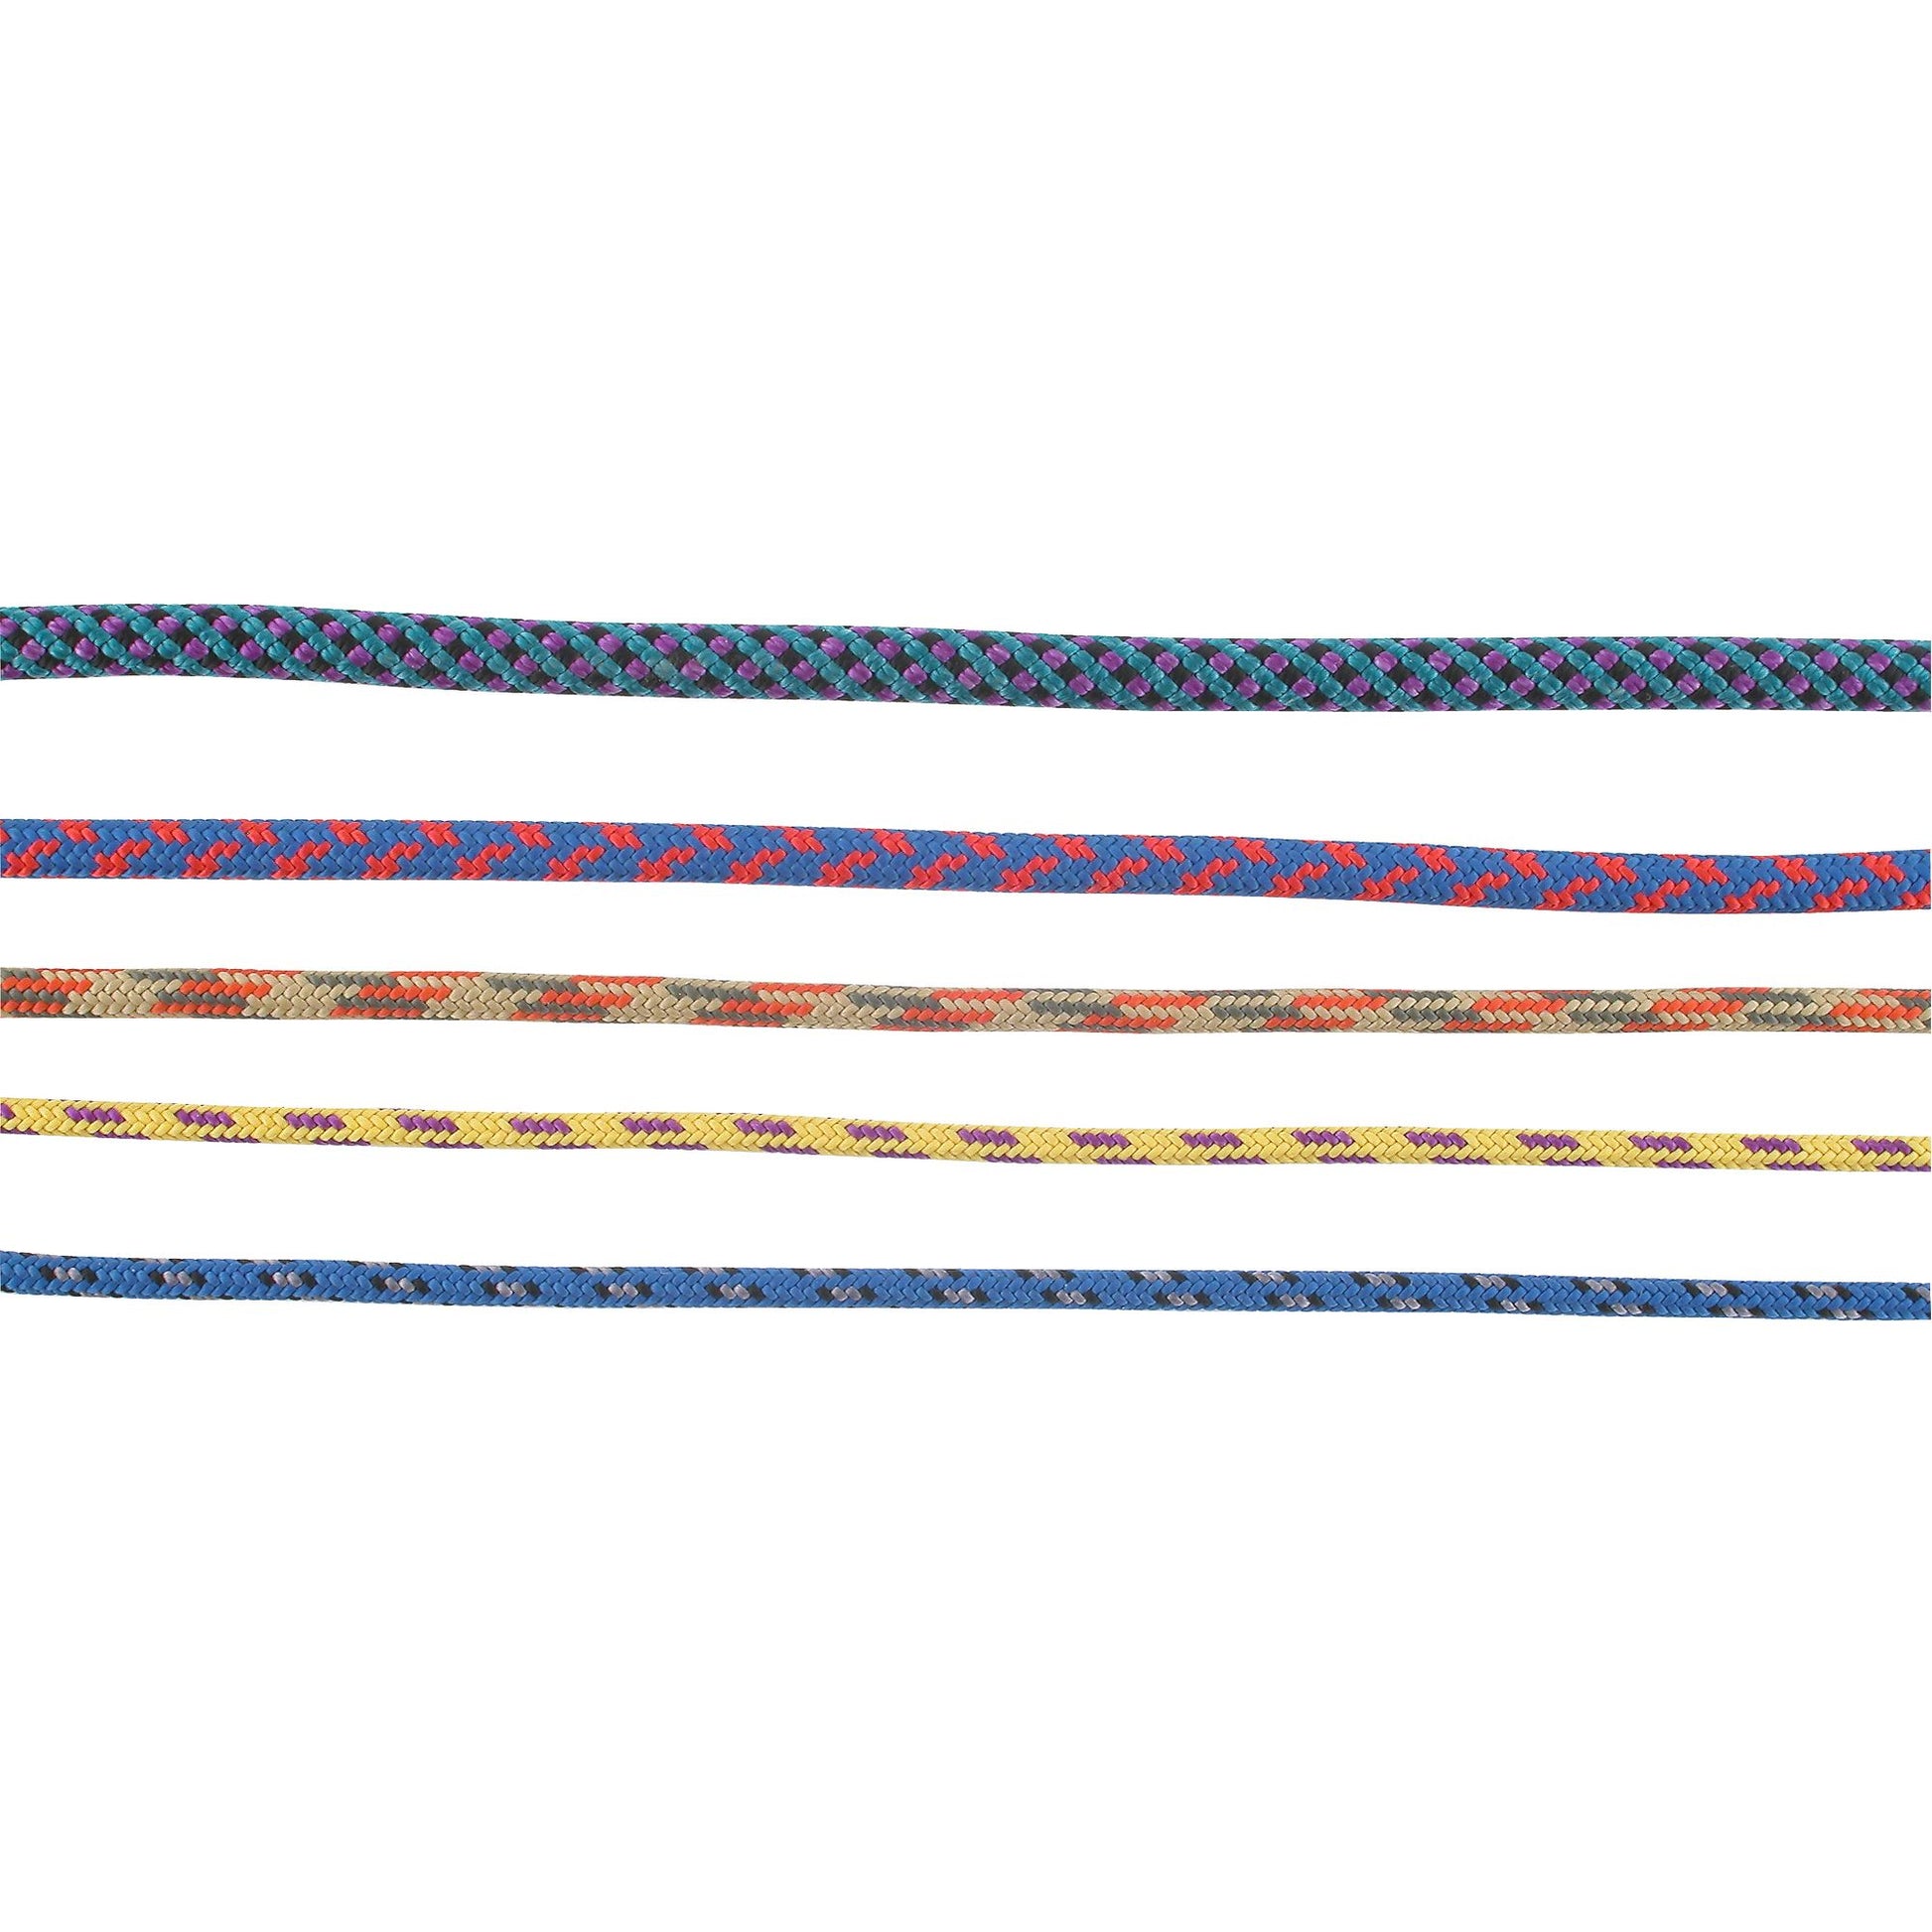 Four different colored NRS Prusik cords on a white background.